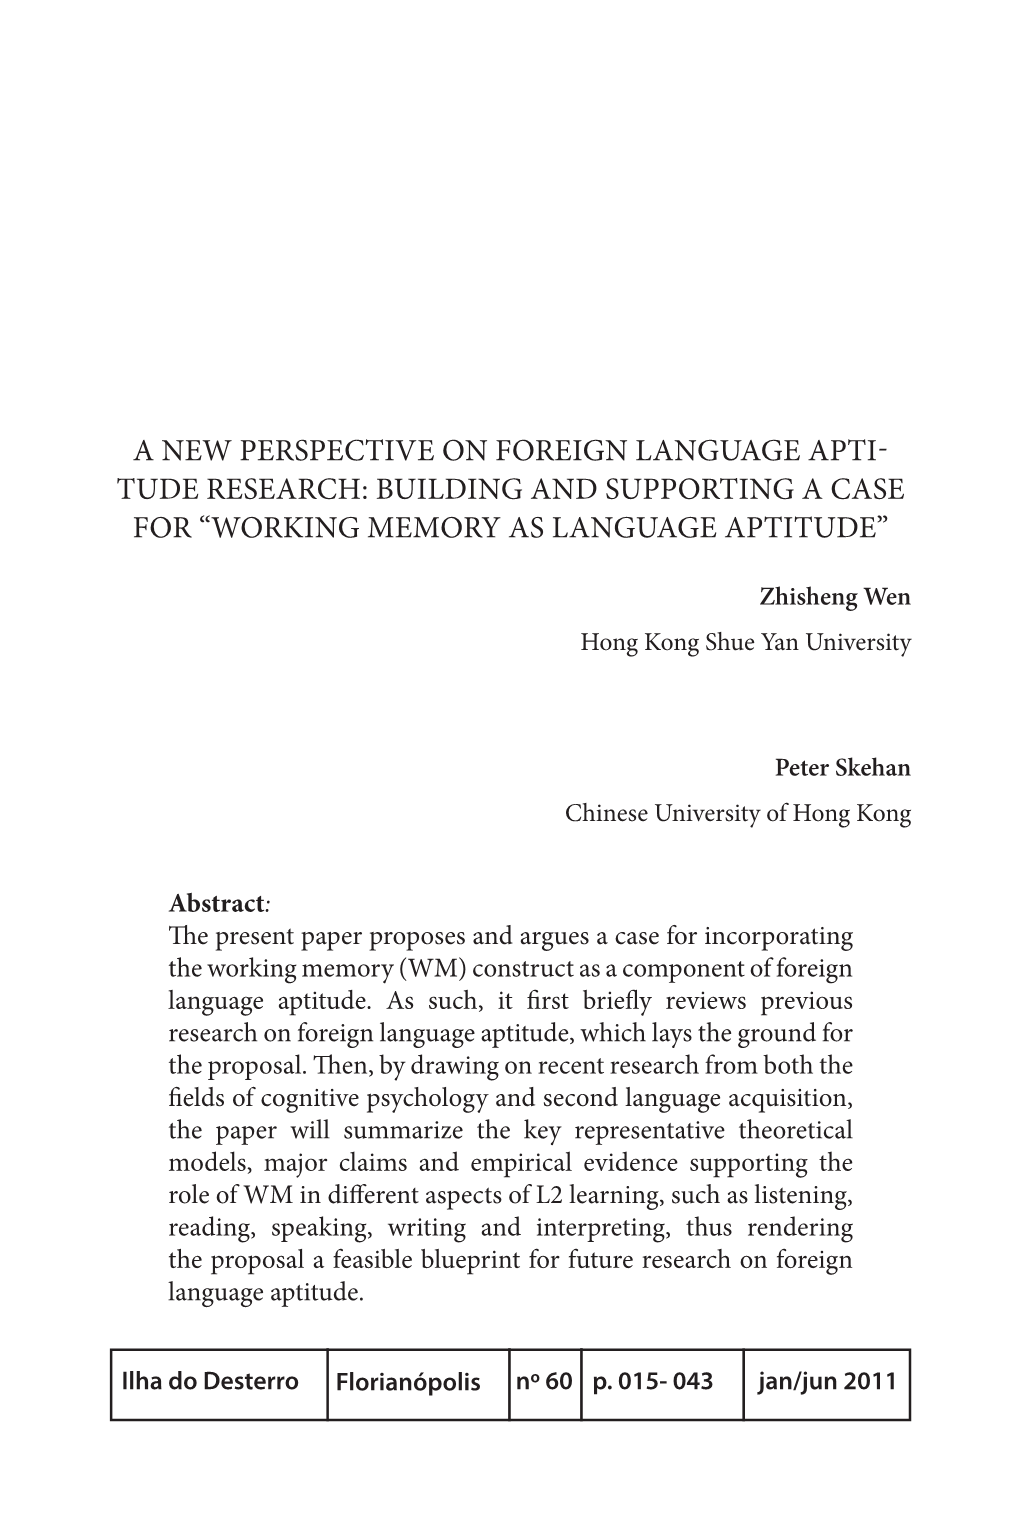 A New Perspective on Foreign Language Apti- Tude Research: Building and Supporting a Case for “Working Memory As Language Aptitude”